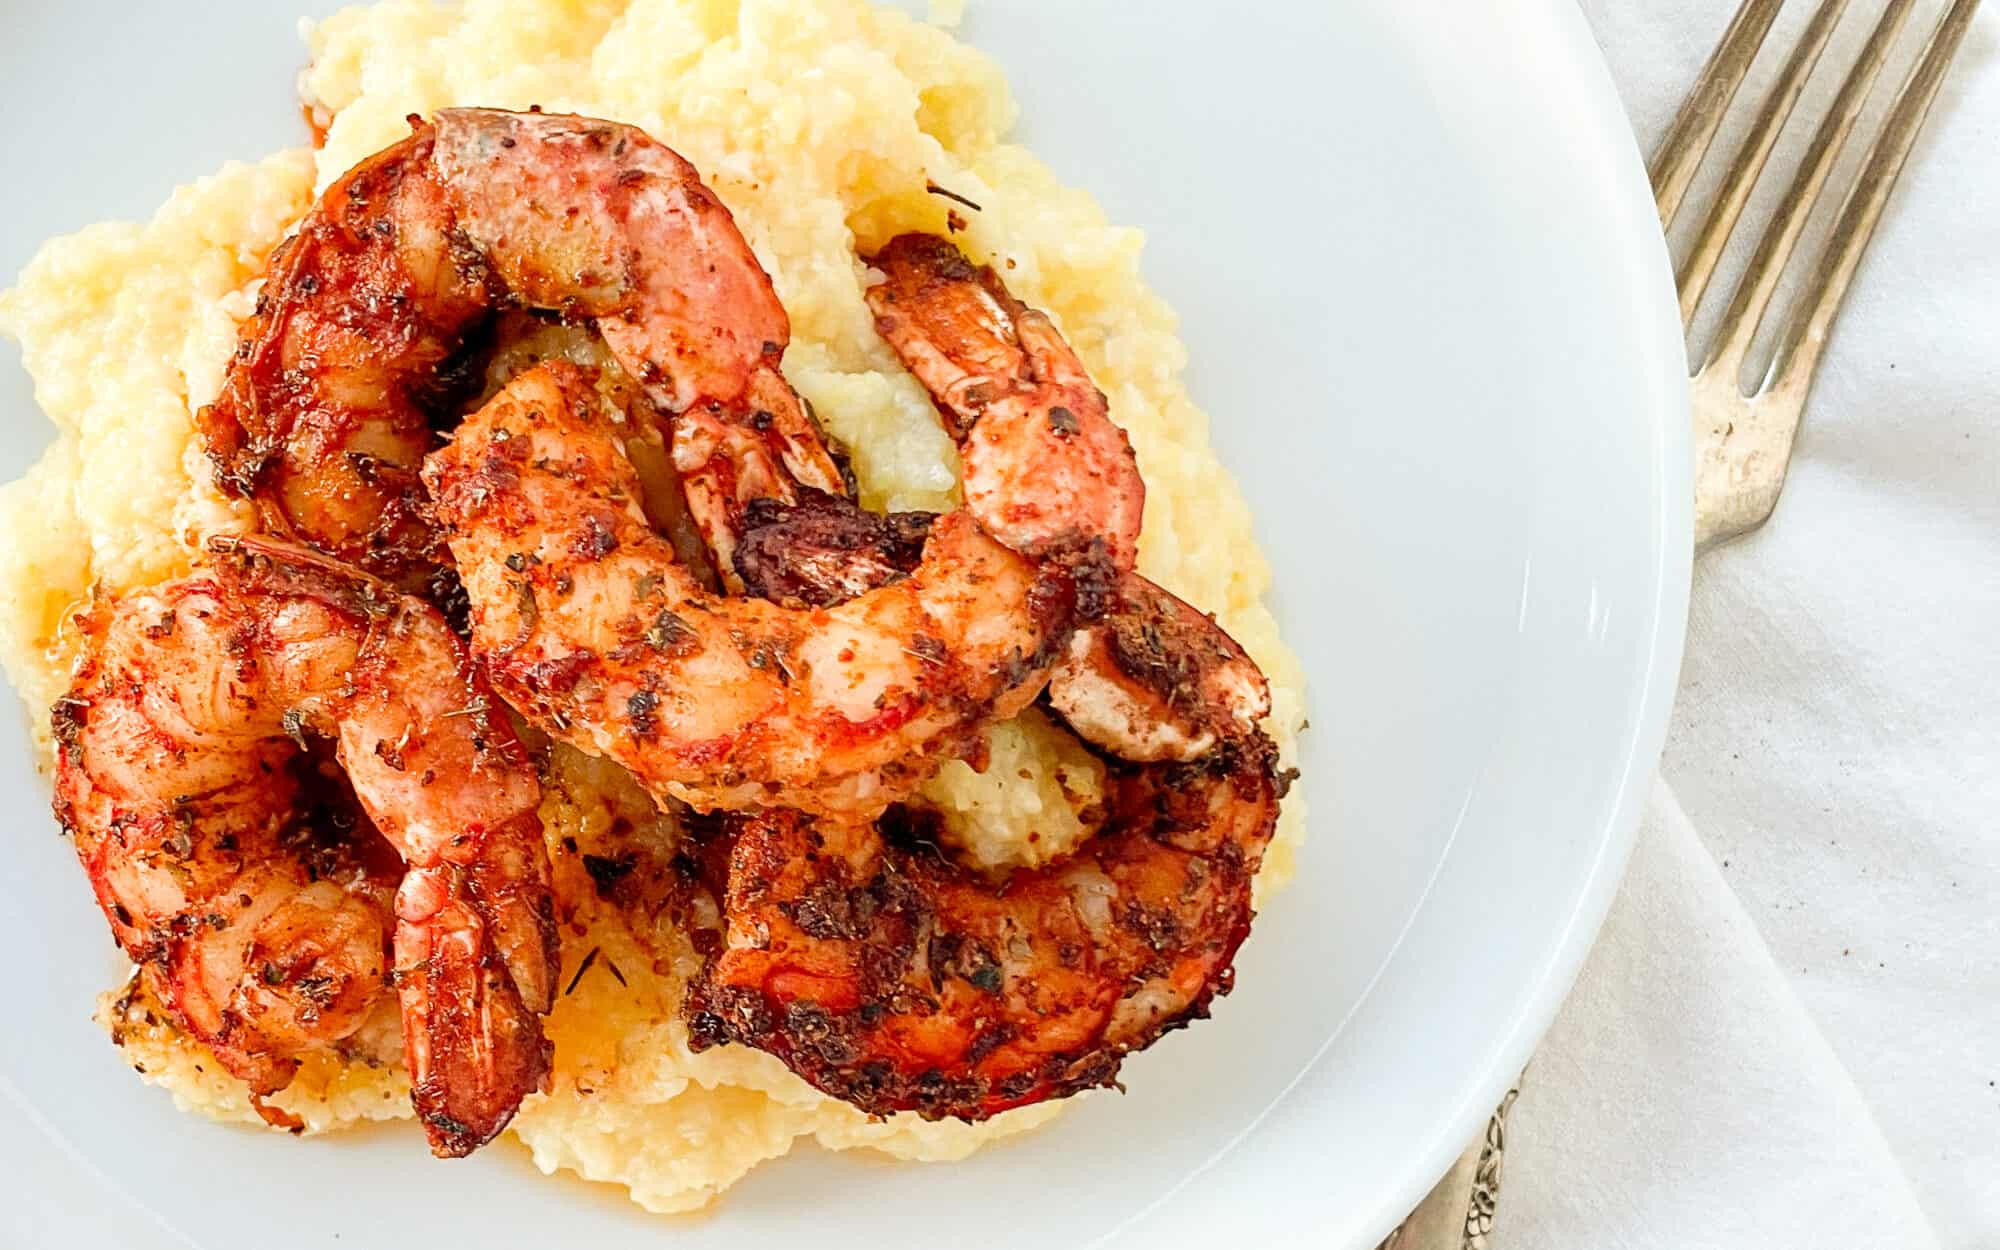 Blackened shrimp on grits with a fork on the right side.